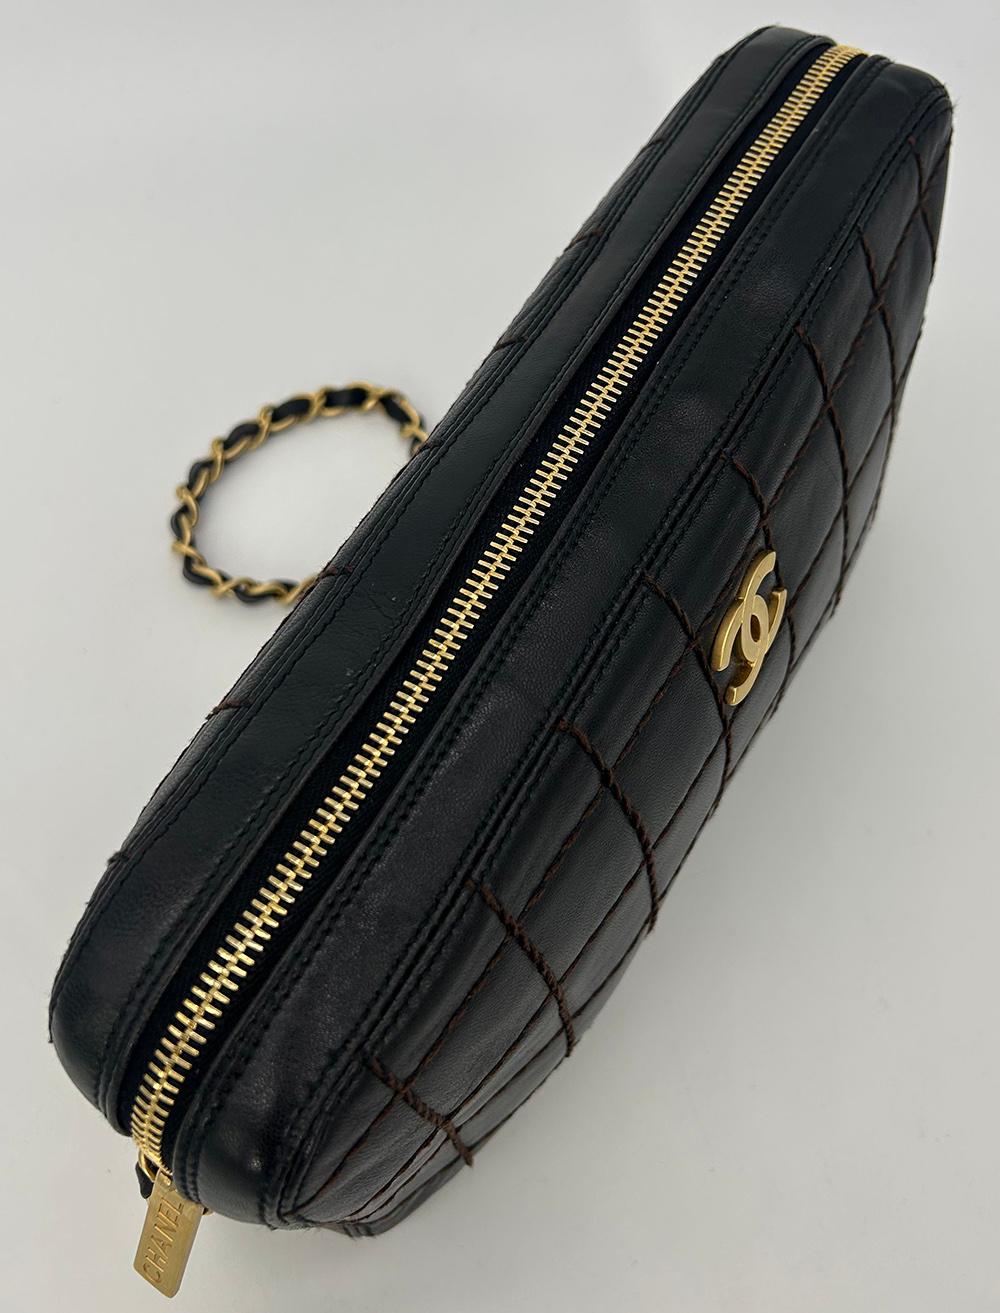 Chanel Black Square Quilted East West Chocolate Bar Bag 3